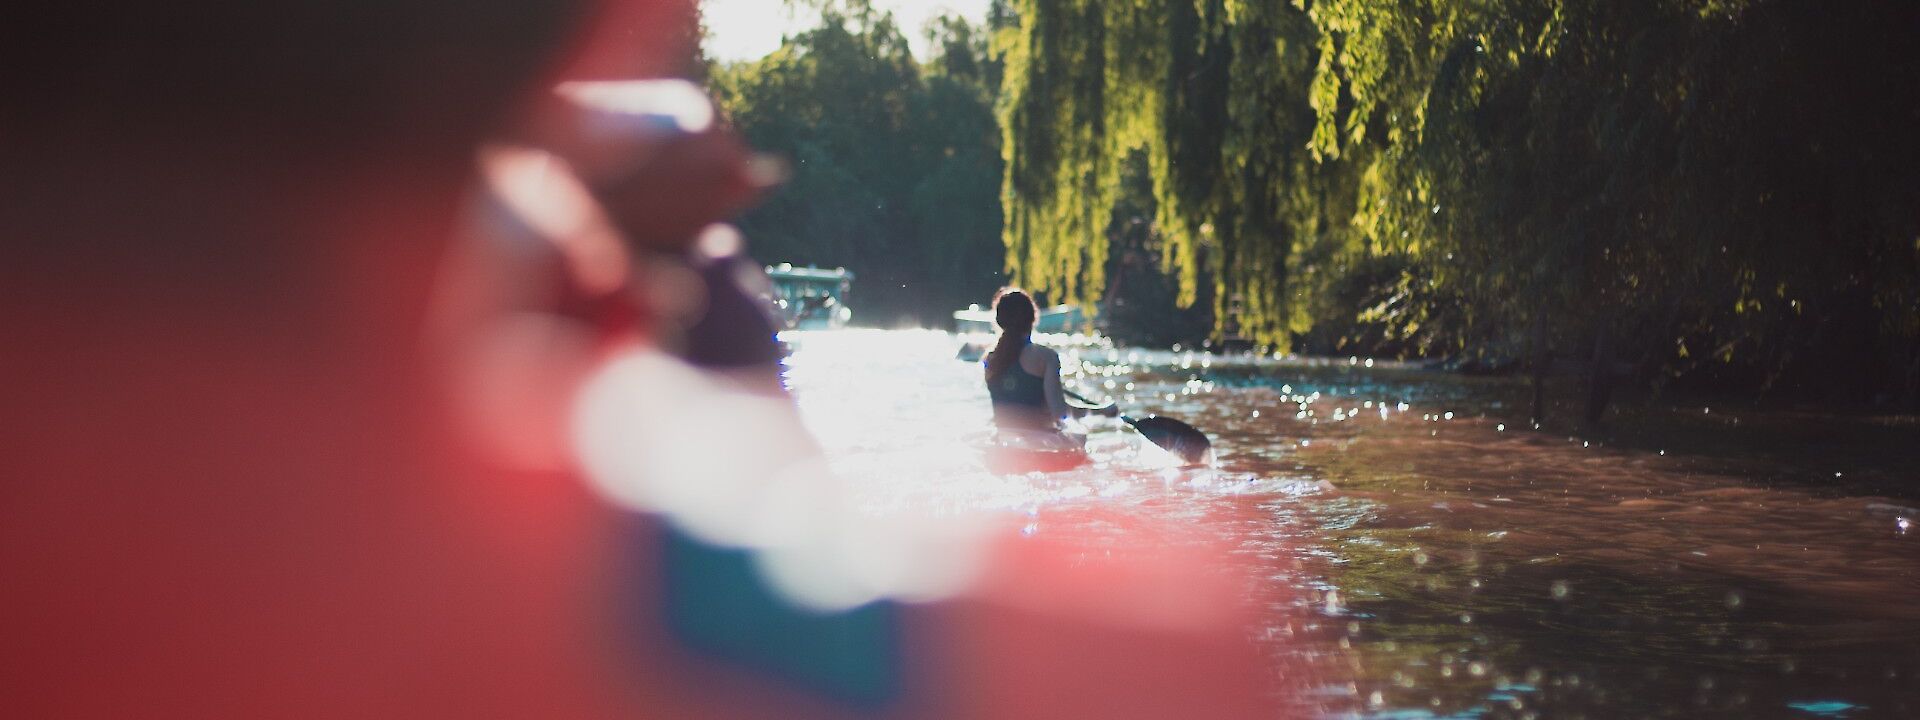 Kayaking on the Tigre Delta, Buenos Aires, Argentina. Geronimo Giqueaux@Unsplash